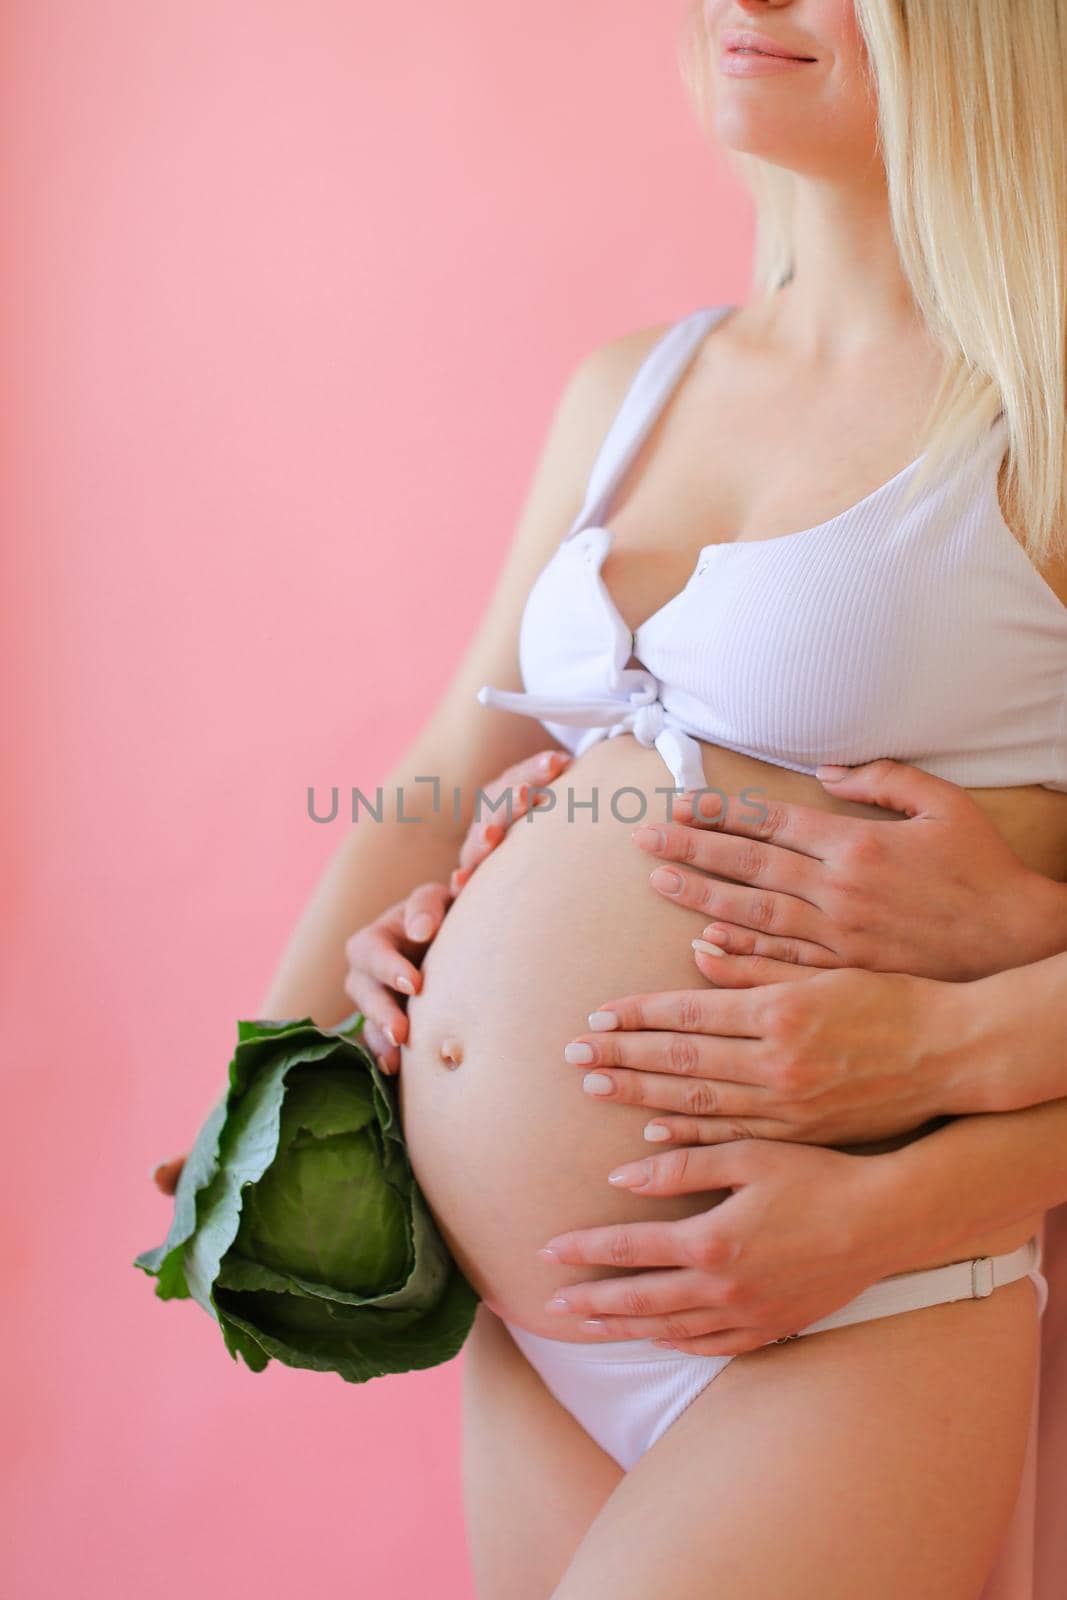 Blonde happy pregnant woman in underwear holding belly and keeping cabbage in pink monophonic background. Concept of expactant photo session.